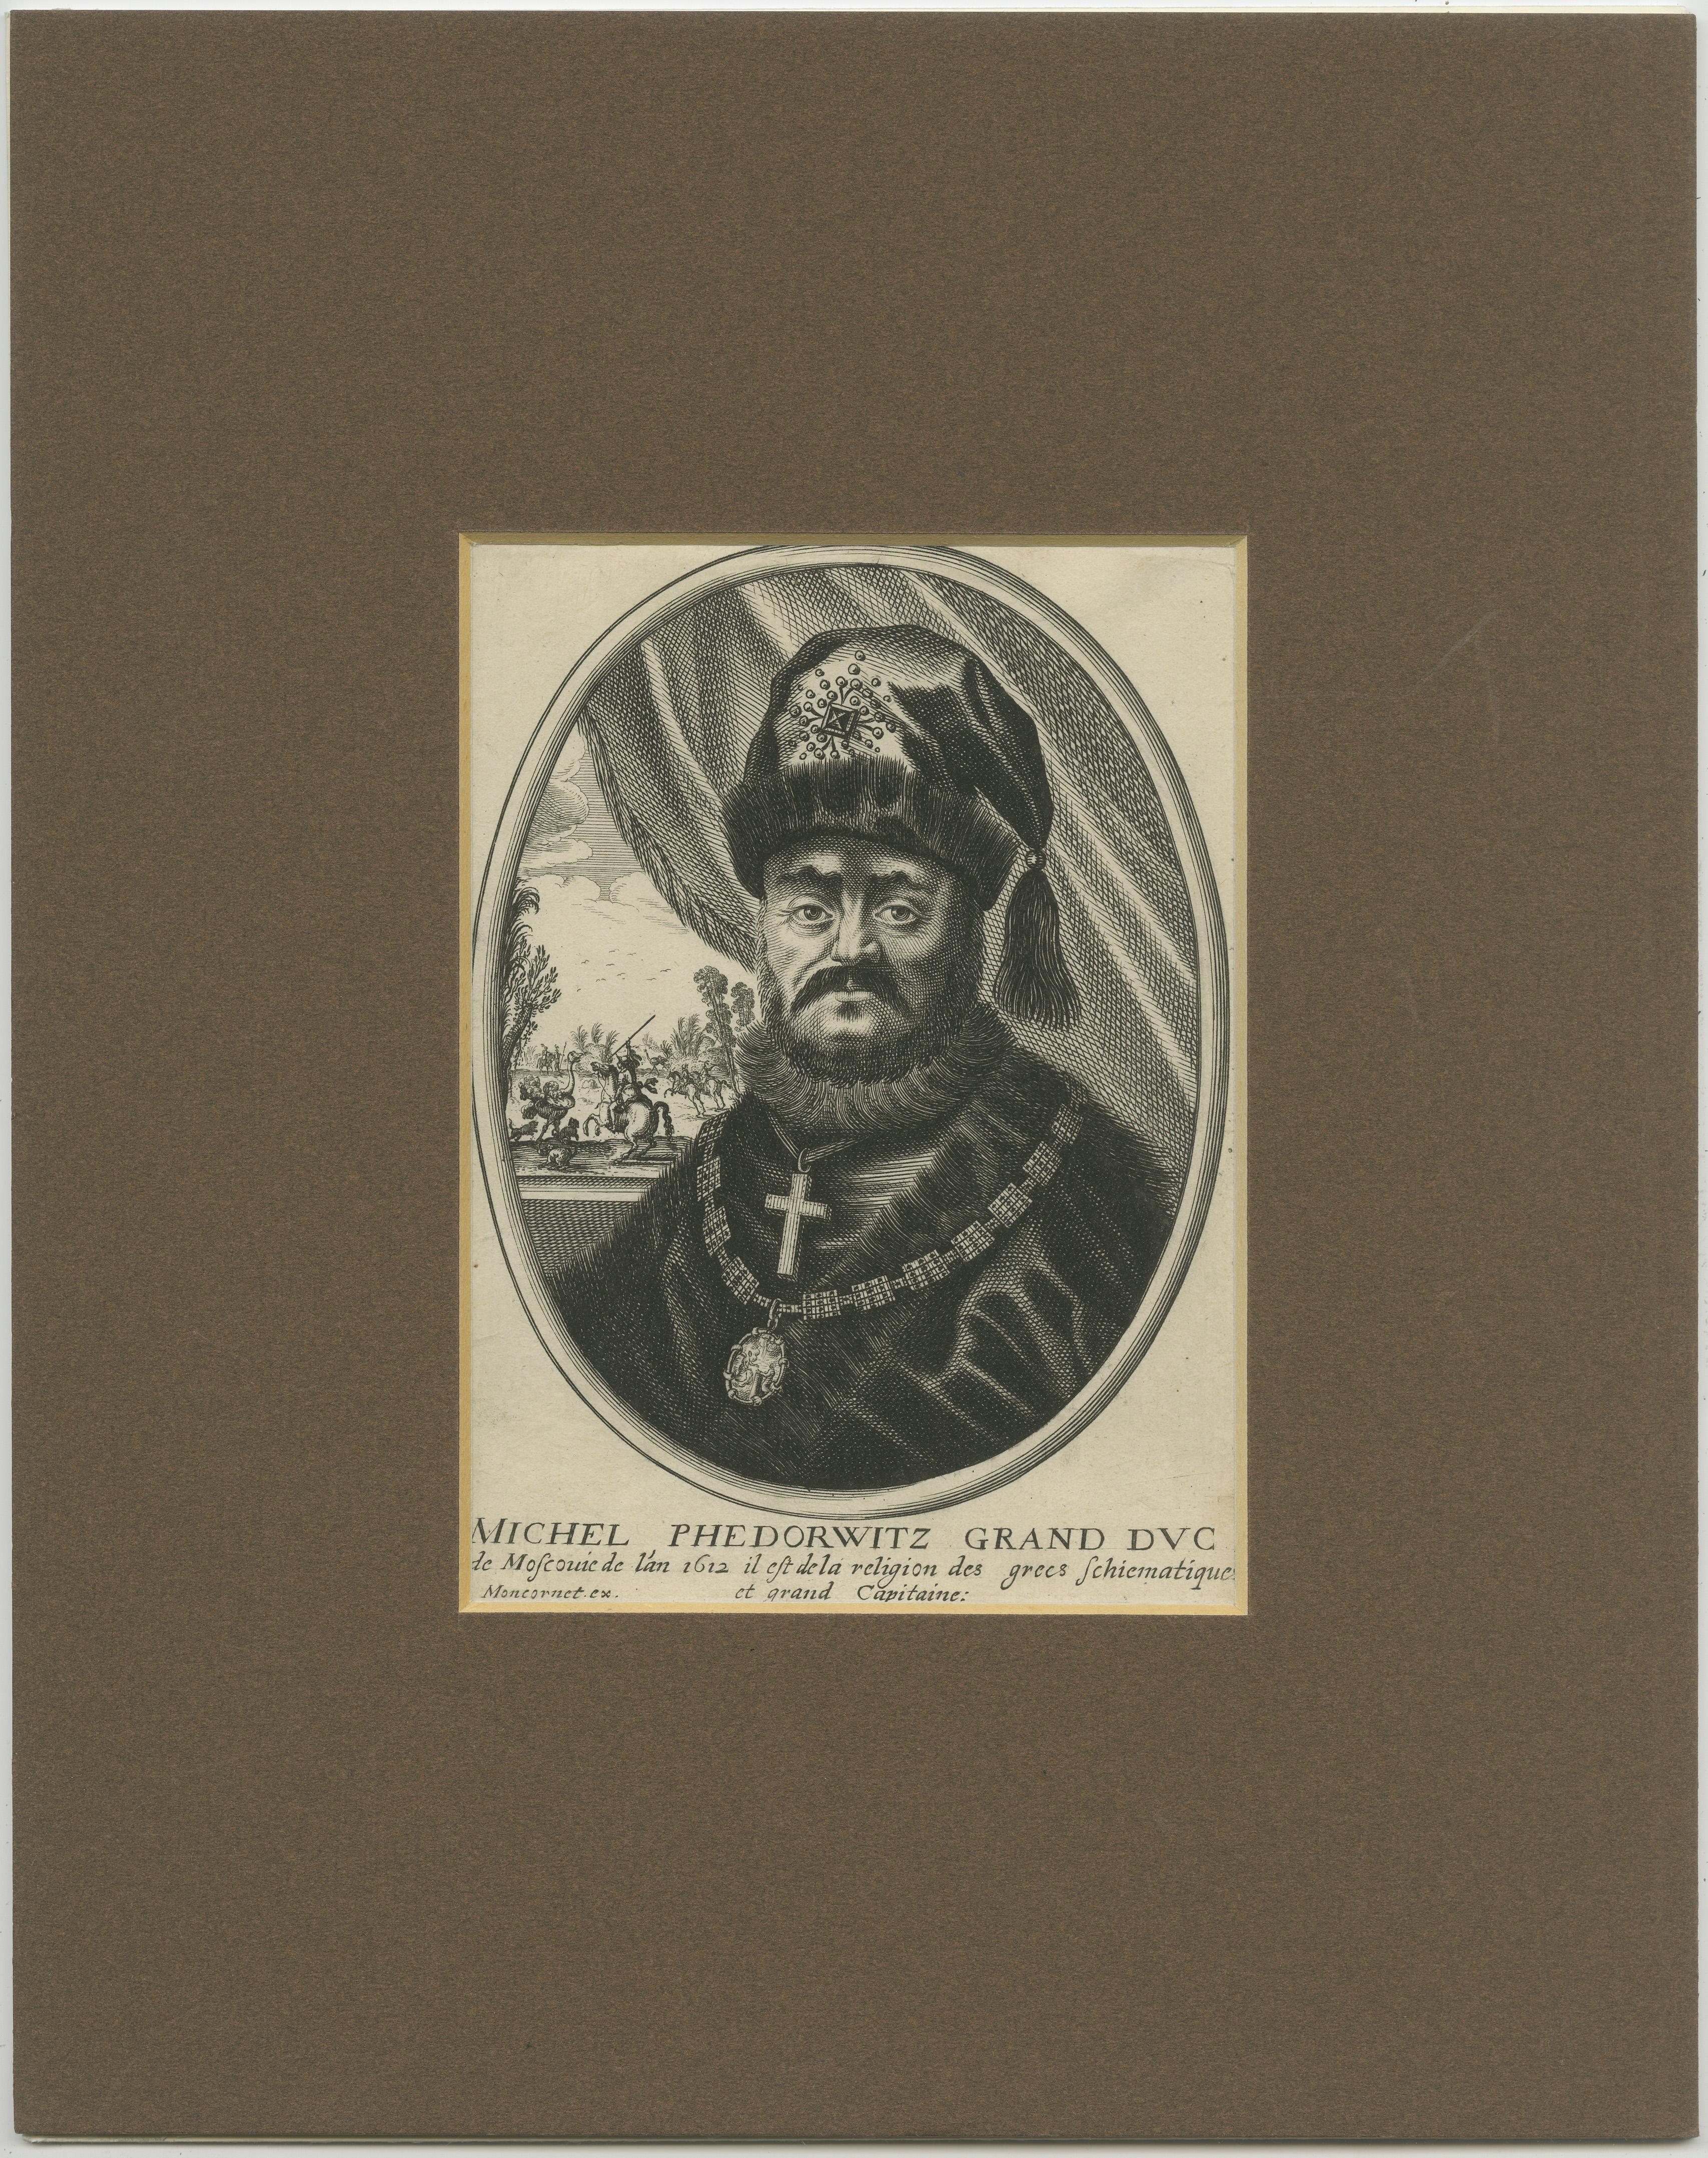 Antique print titled 'Michel Phedorwitz Grand Duc (..)'. Portrait of Michael of Russia (Mikhail Fyodorovich Romanov), bust-length directed to left; in oval.

Published by Balthasar Moncornet, circa 1660. Balthasar Moncornet (b.1600 Rouen, France